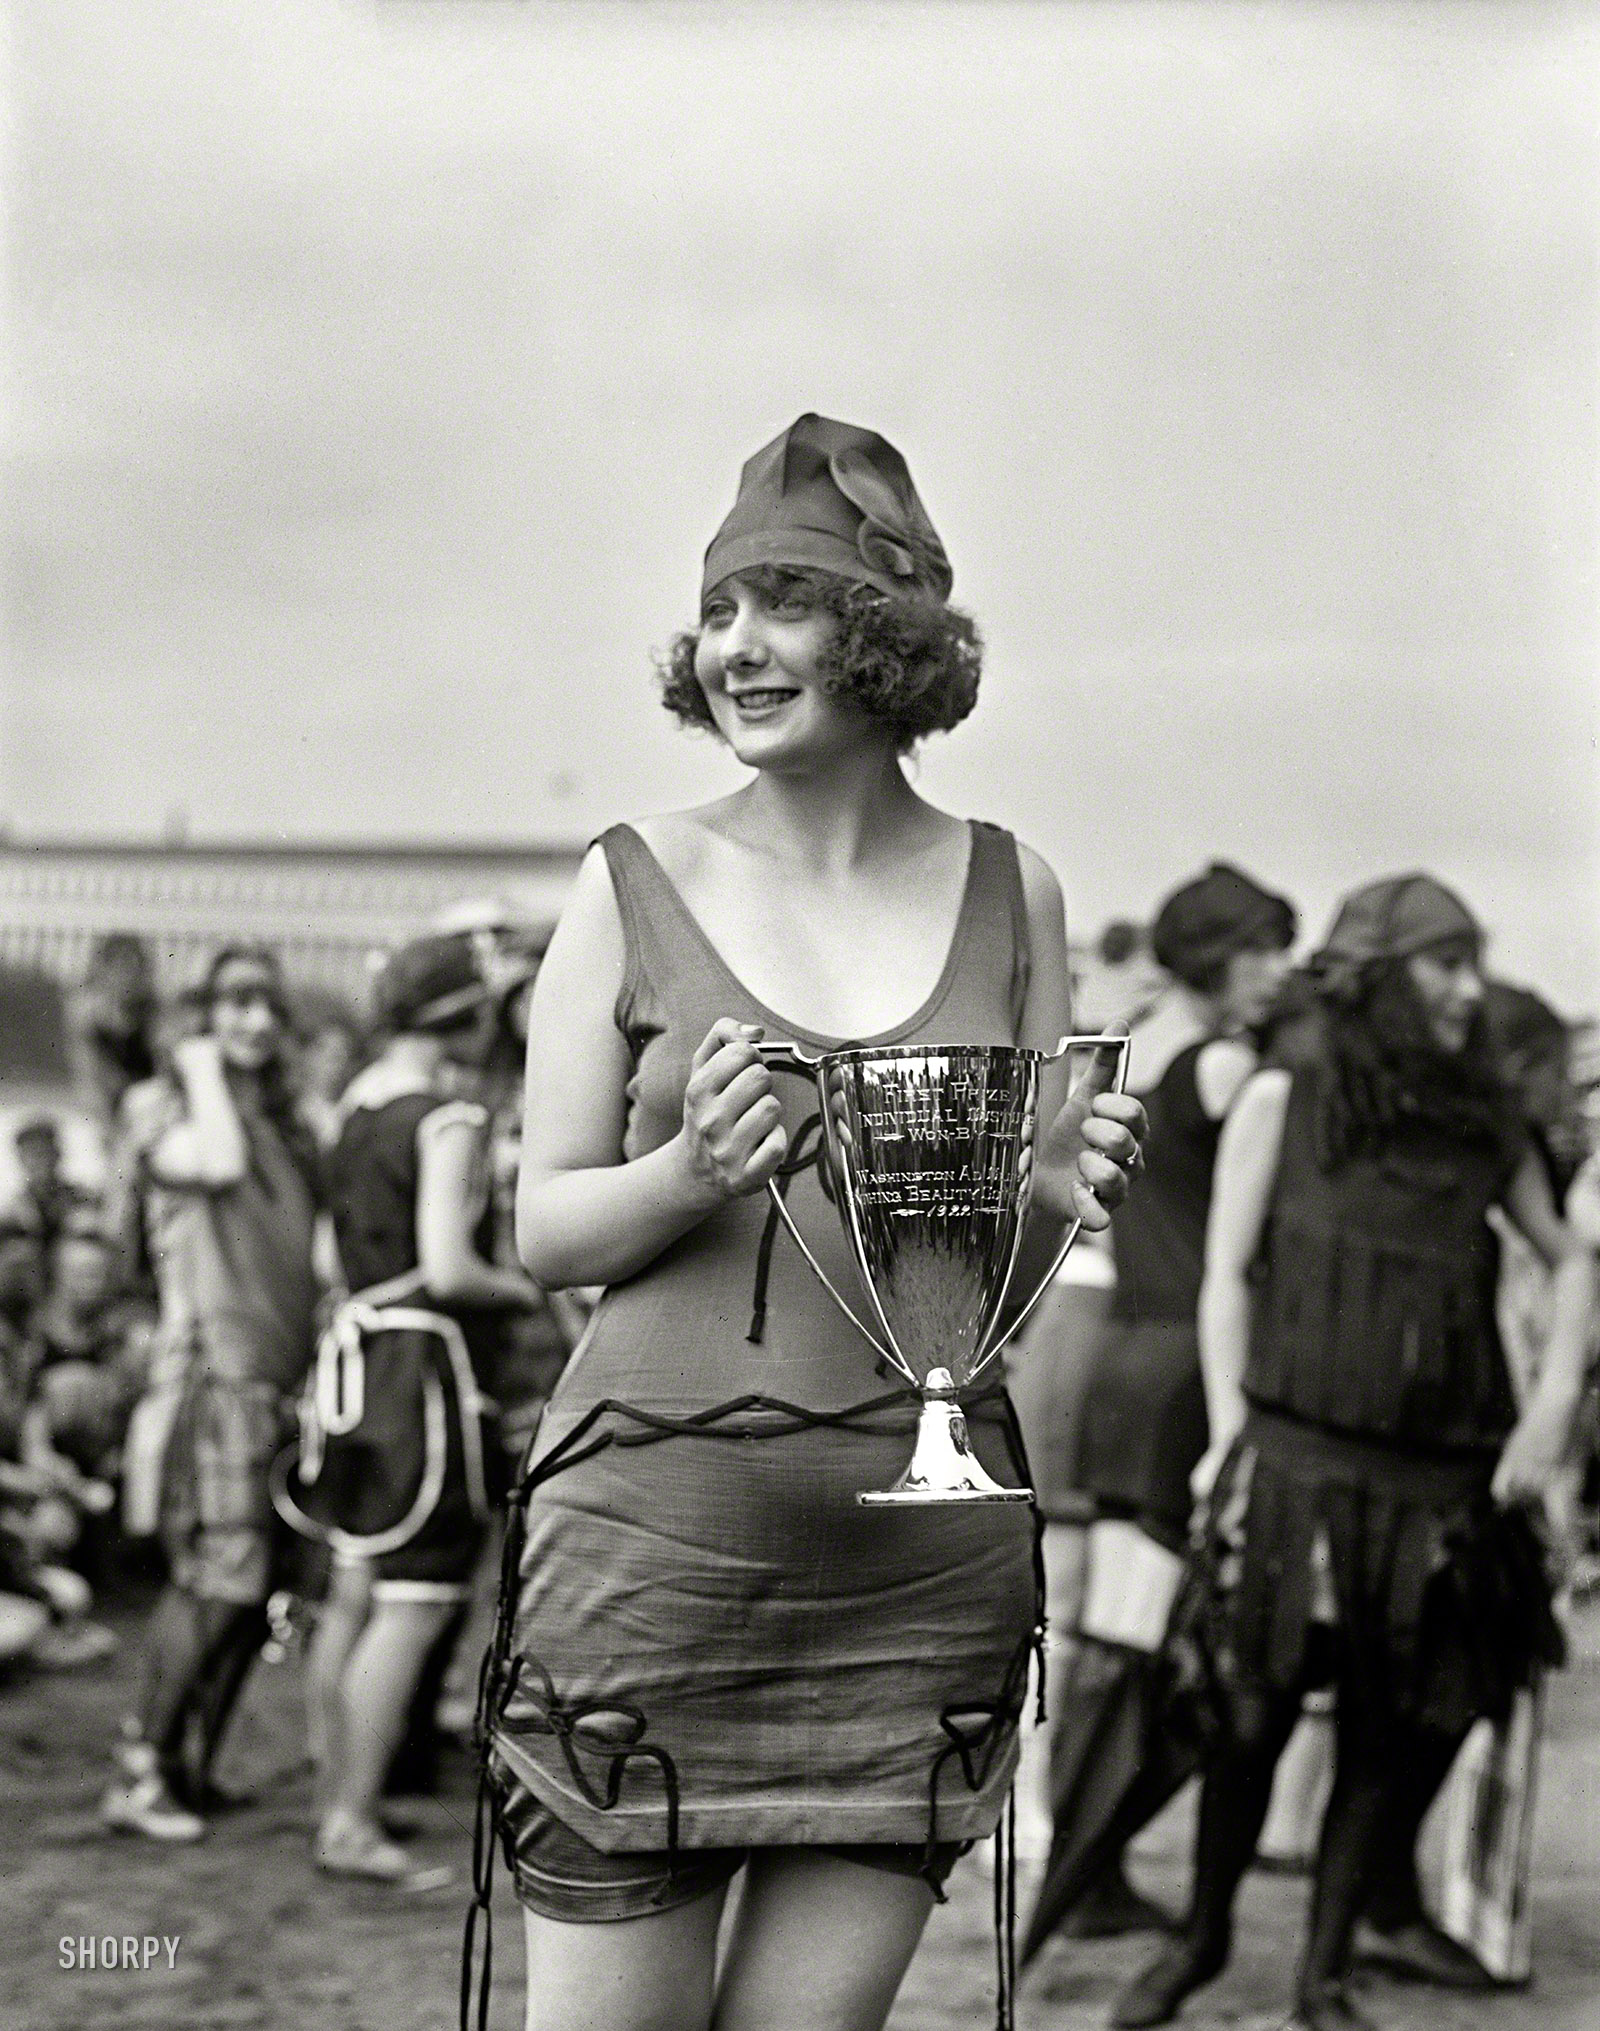 June 17, 1922. "Washington Ad Club bathing costume contest at Tidal Basin." Miss Anna Niebel, "former Follies girl who lives at 1370 Harvard street northwest," took first place. At right, the unmistakable if blurry figure of Iola Swinnerton, First Lady of Shorpy, who came in second. Harris & Ewing glass negative. View full size.